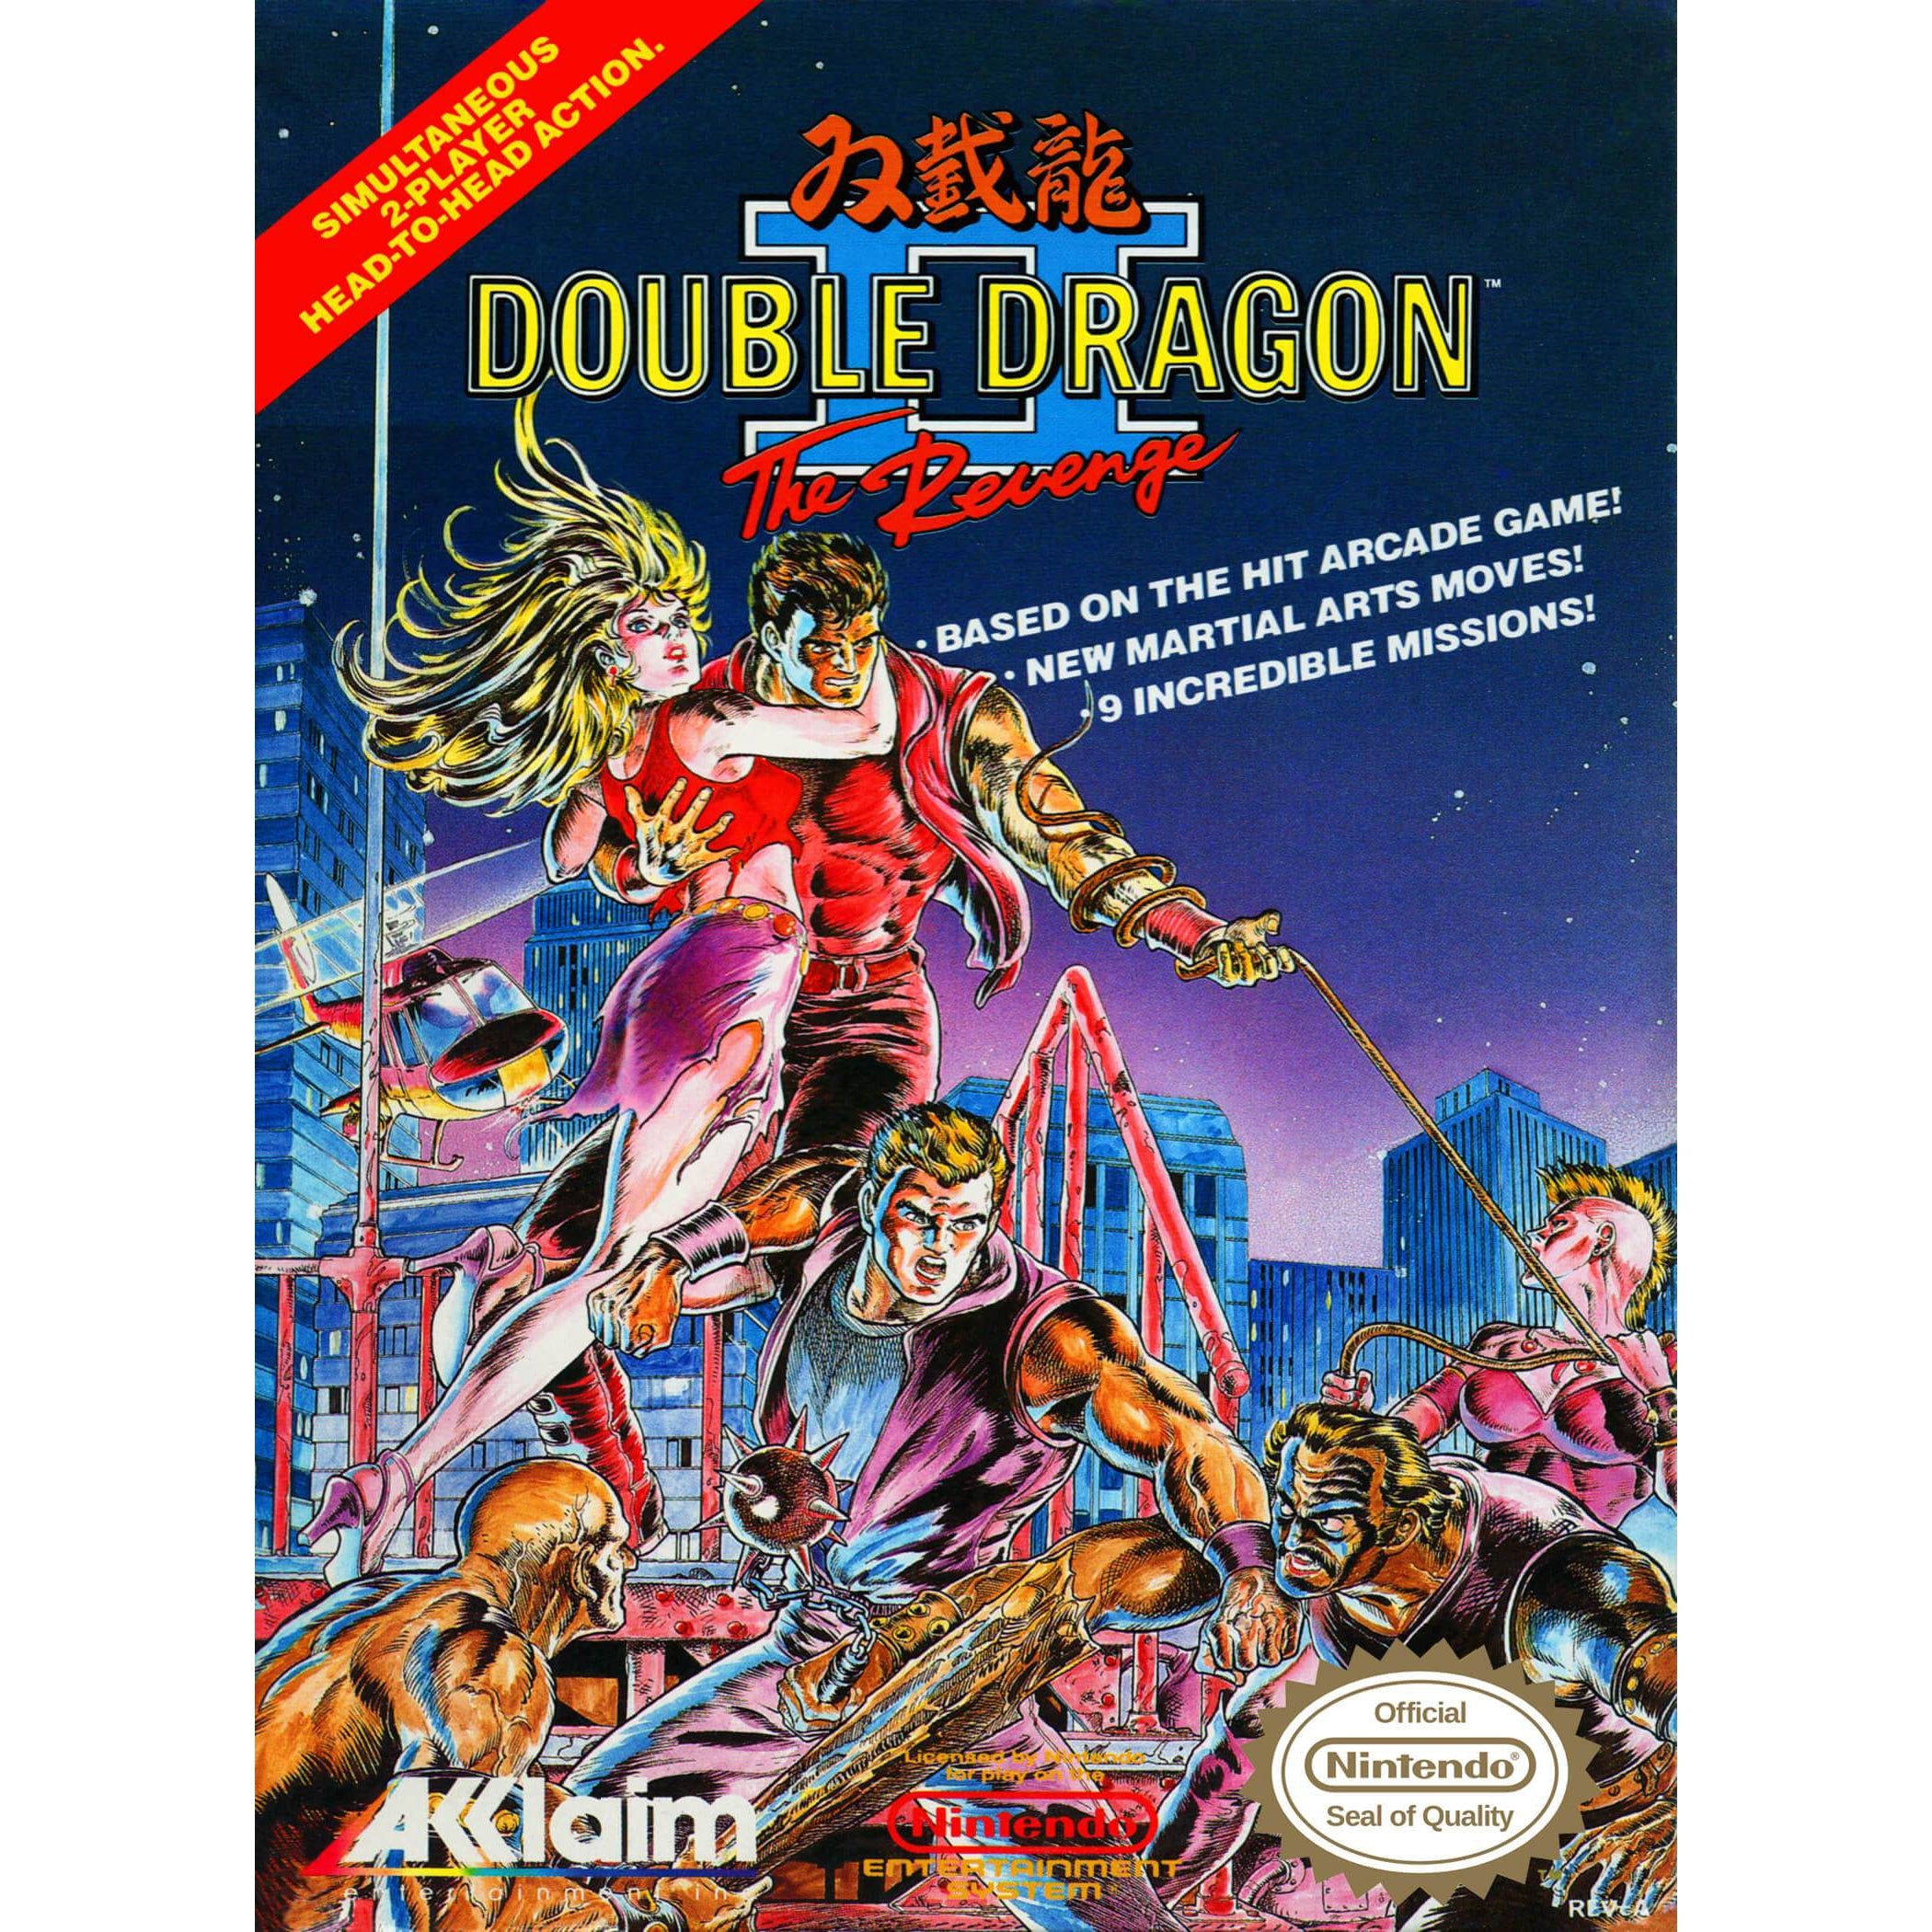 Double Dragon II: The Revenge - Authentic NES Game Cartridge - YourGamingShop.com - Buy, Sell, Trade Video Games Online. 120 Day Warranty. Satisfaction Guaranteed.